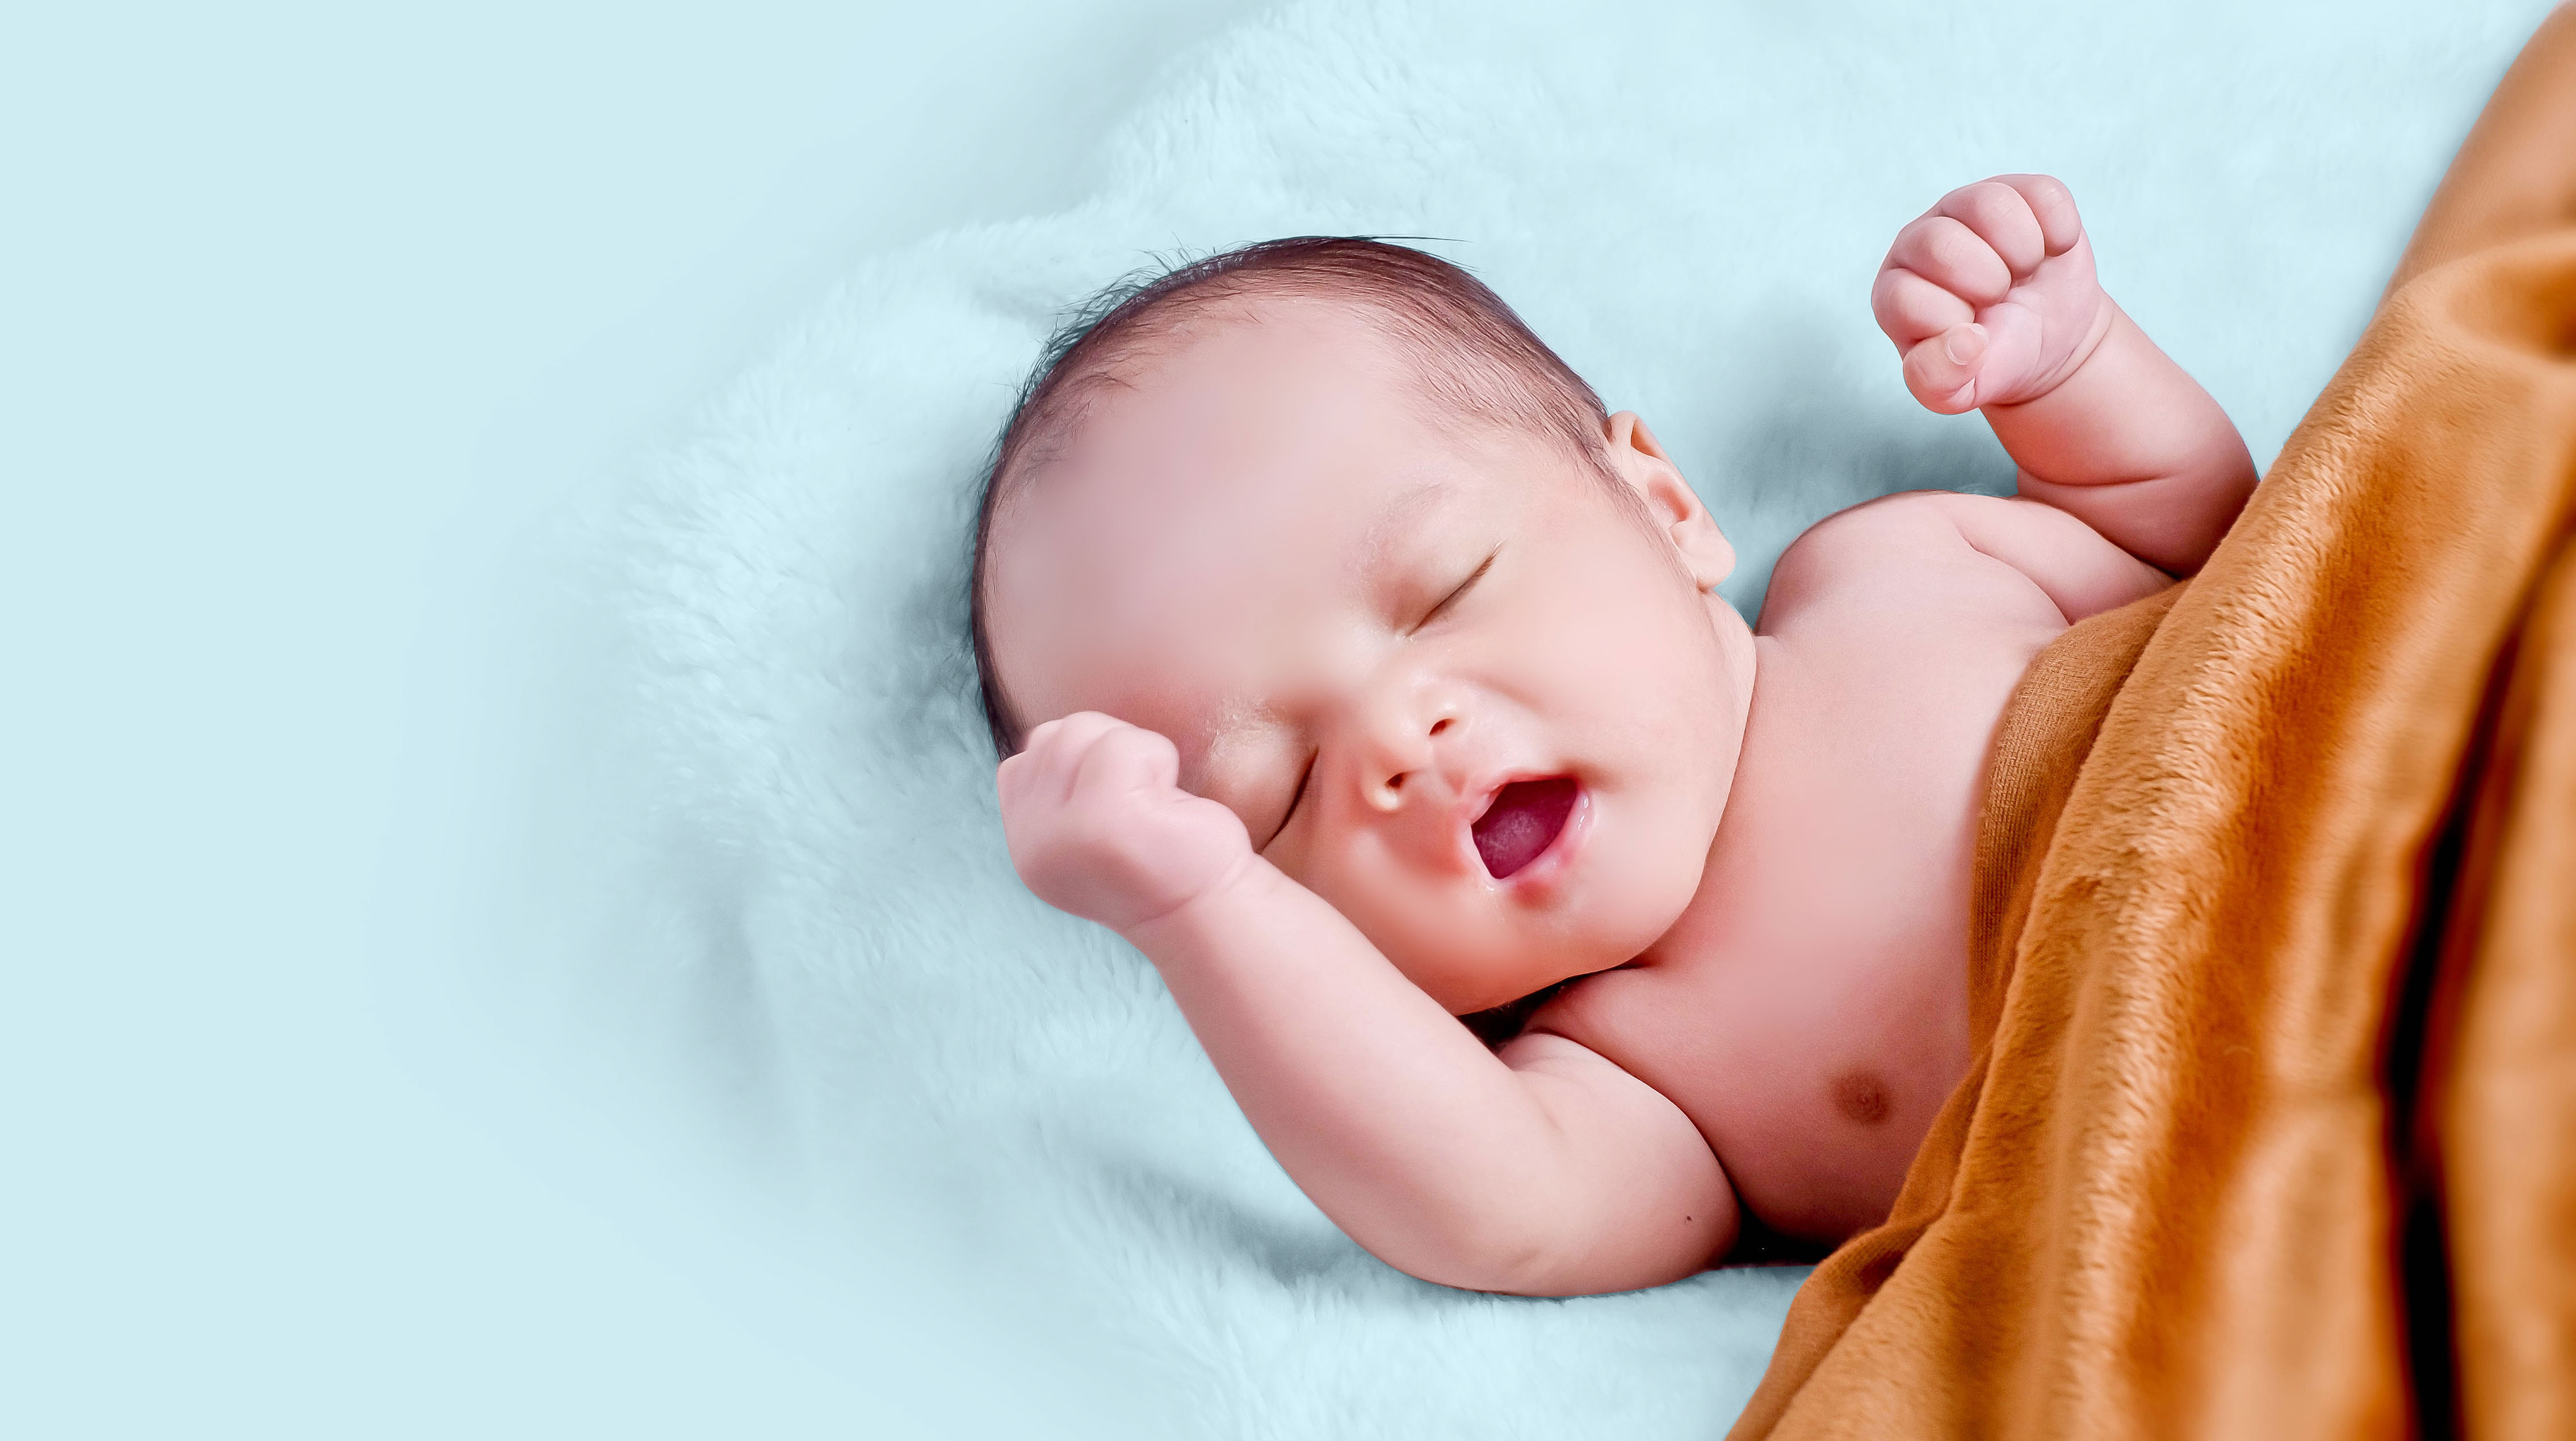 Celebrate When Your 1-Month-Old Baby Can Do These 3 Things!